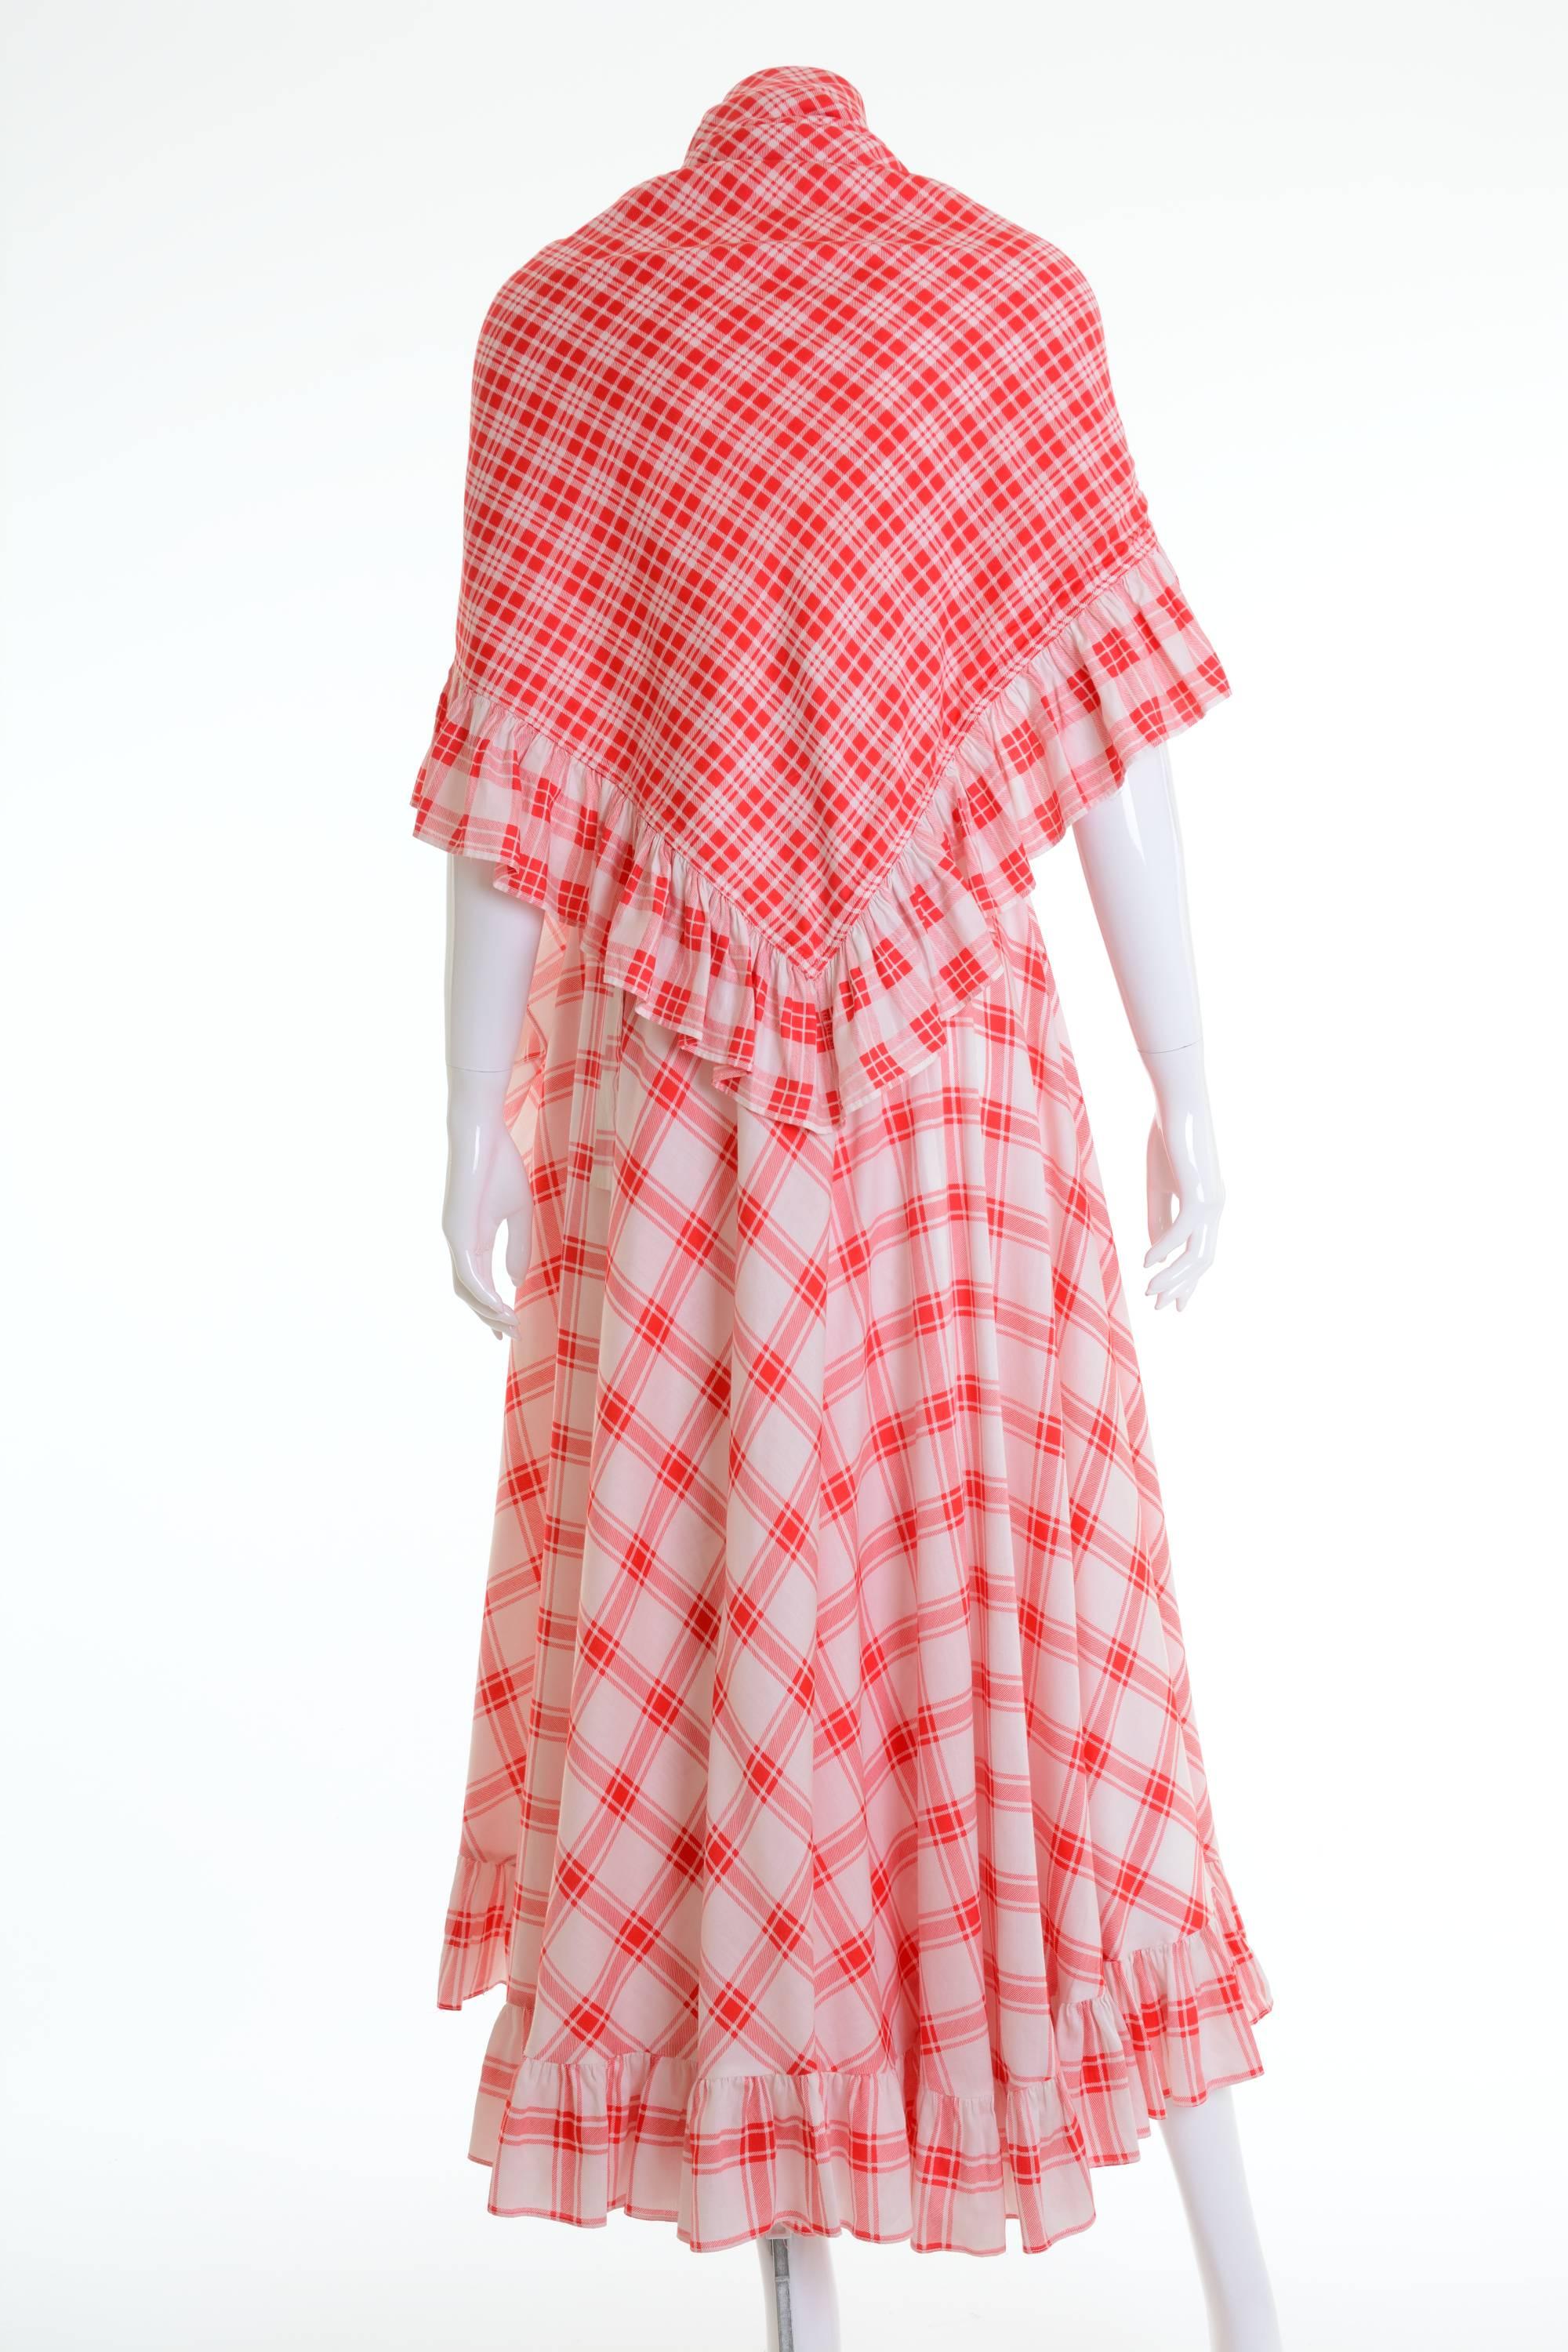 This 1970s Saint Laurent Rive Gauche long gypsy skirt is in a red and white plaid cotton fabric. The skirt has flounces hem and the scarf also.
The closure is made by a ribbon and the waistband is adjustable.

Very Good vintage condition

Label: